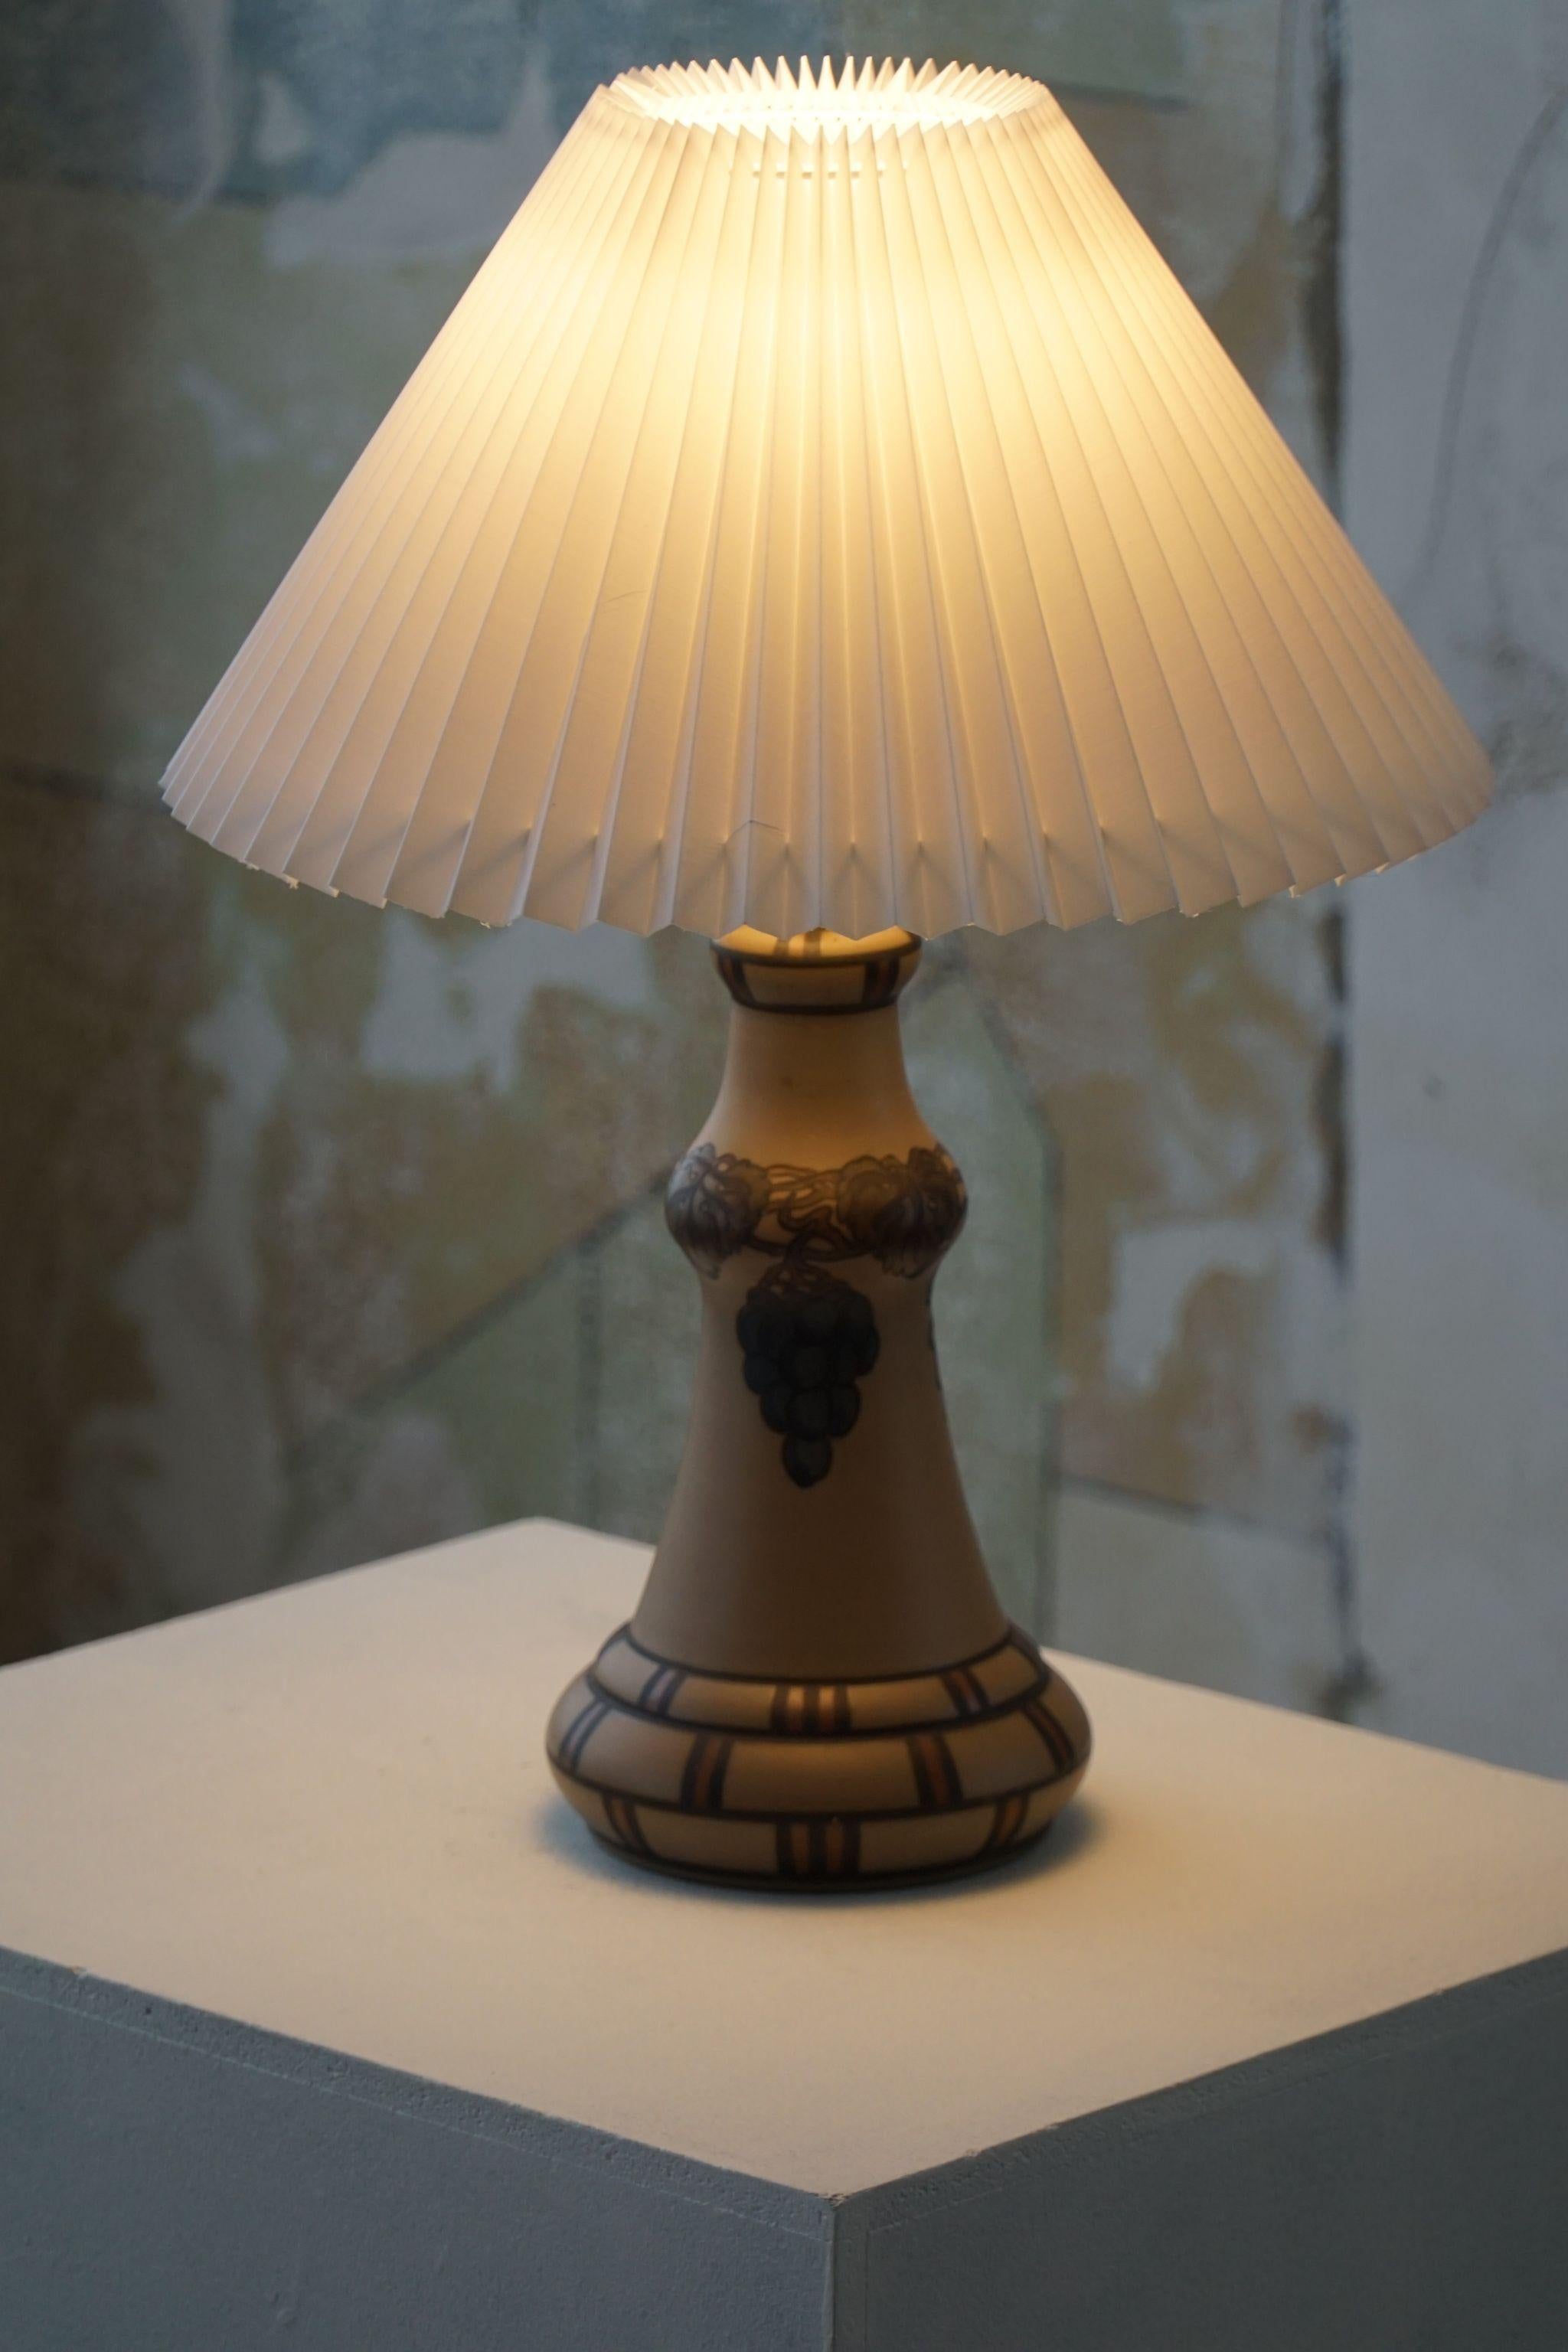 Danish Art Nouveau Table Lamp in Terracotta, Made by L. Hjorth, Bornholm, 1930s 2